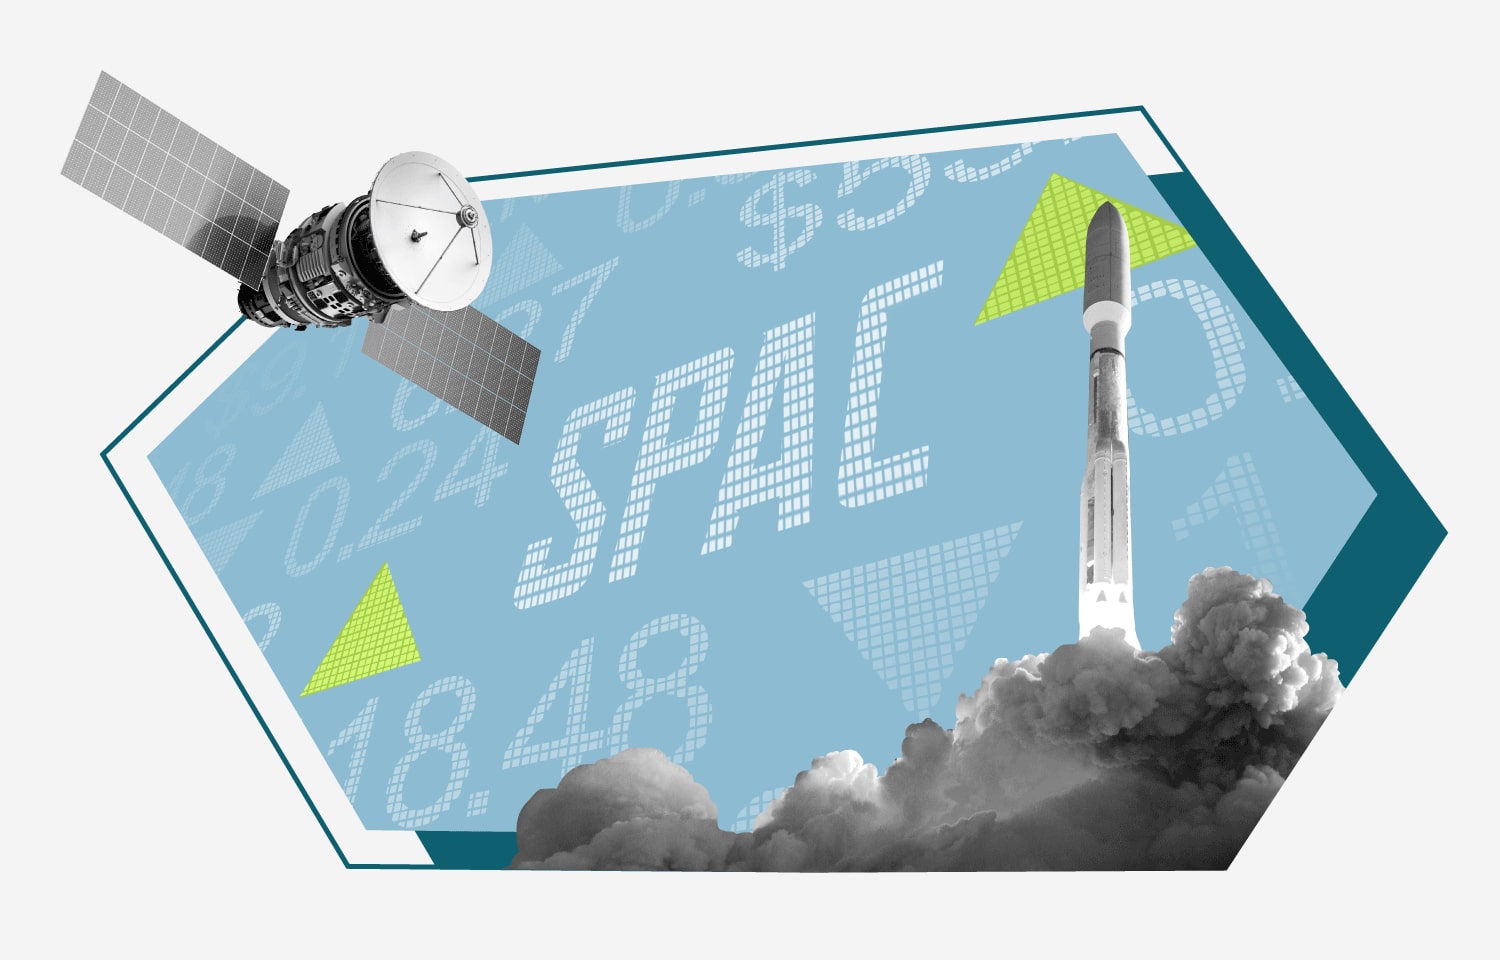 Atlas illustration featured spacs in space